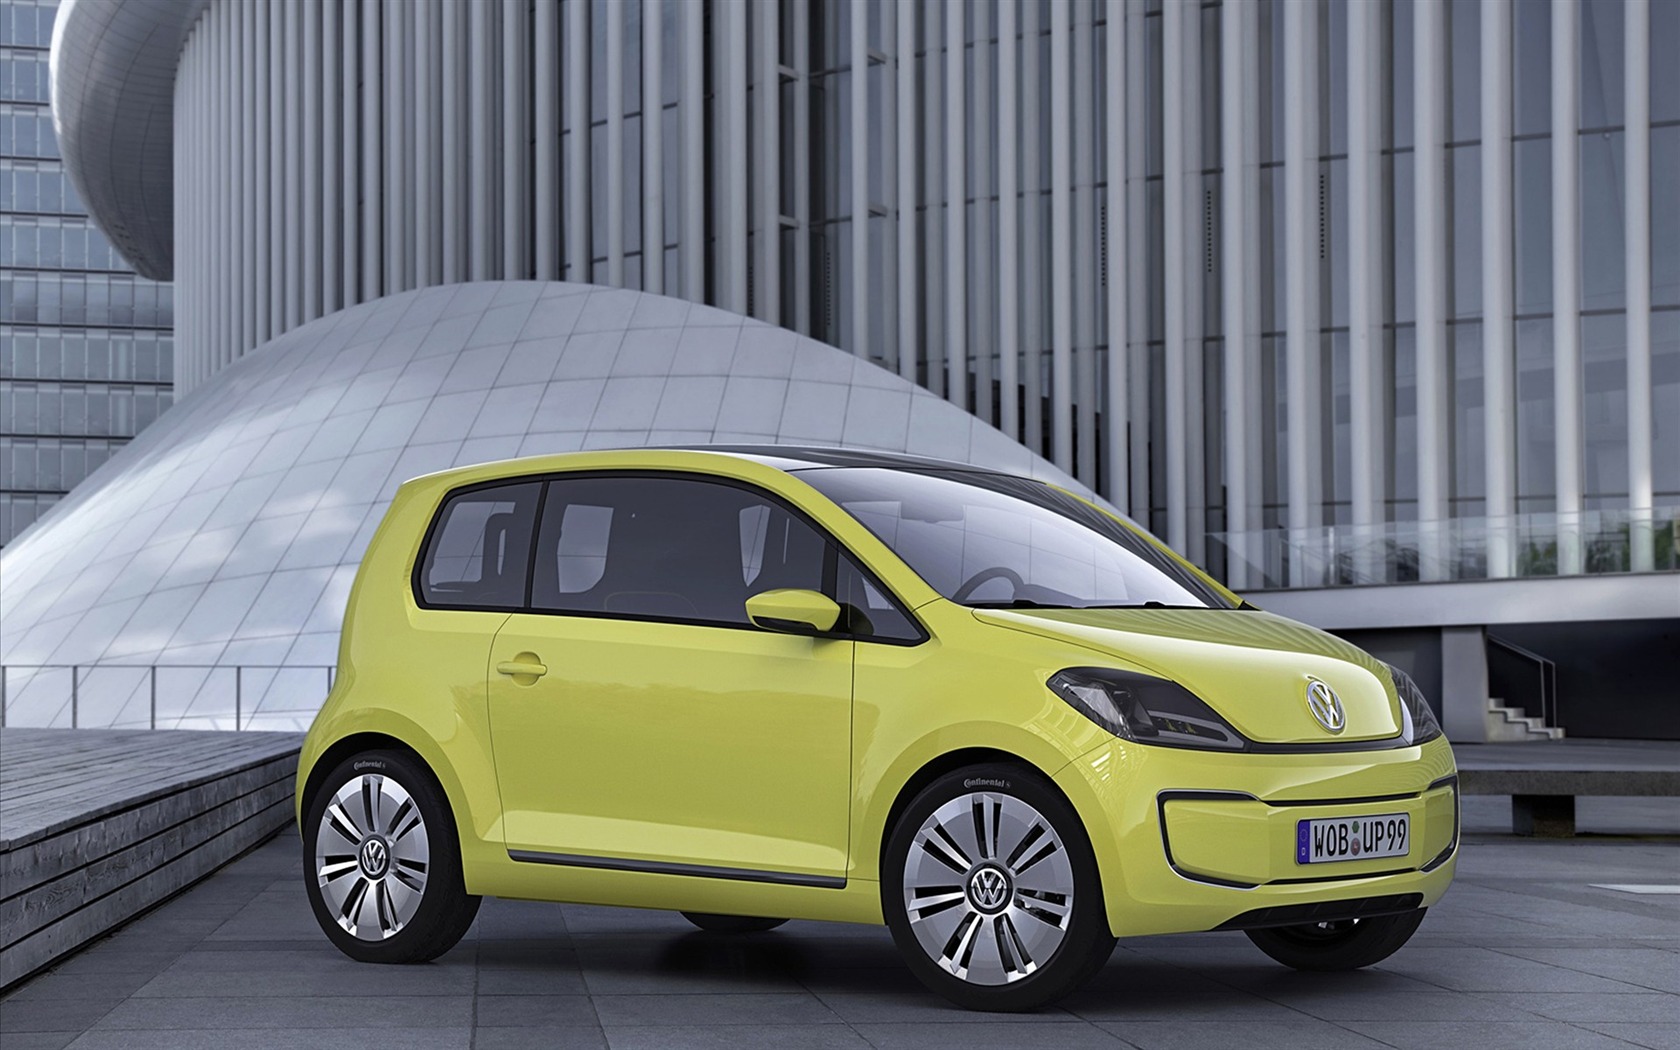 Volkswagen Concept Car tapety (2) #15 - 1680x1050